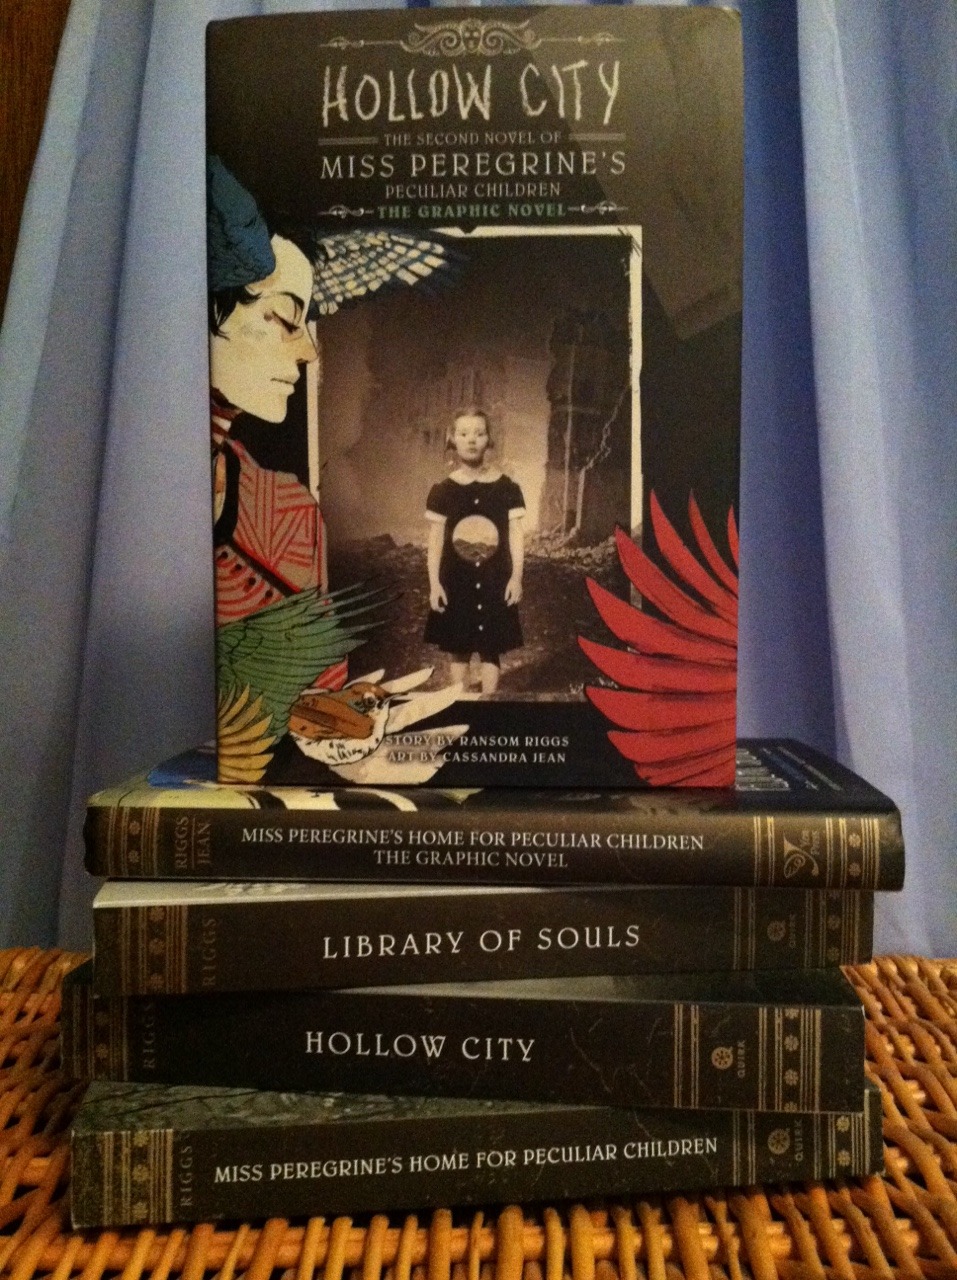 hollow city miss peregrine book